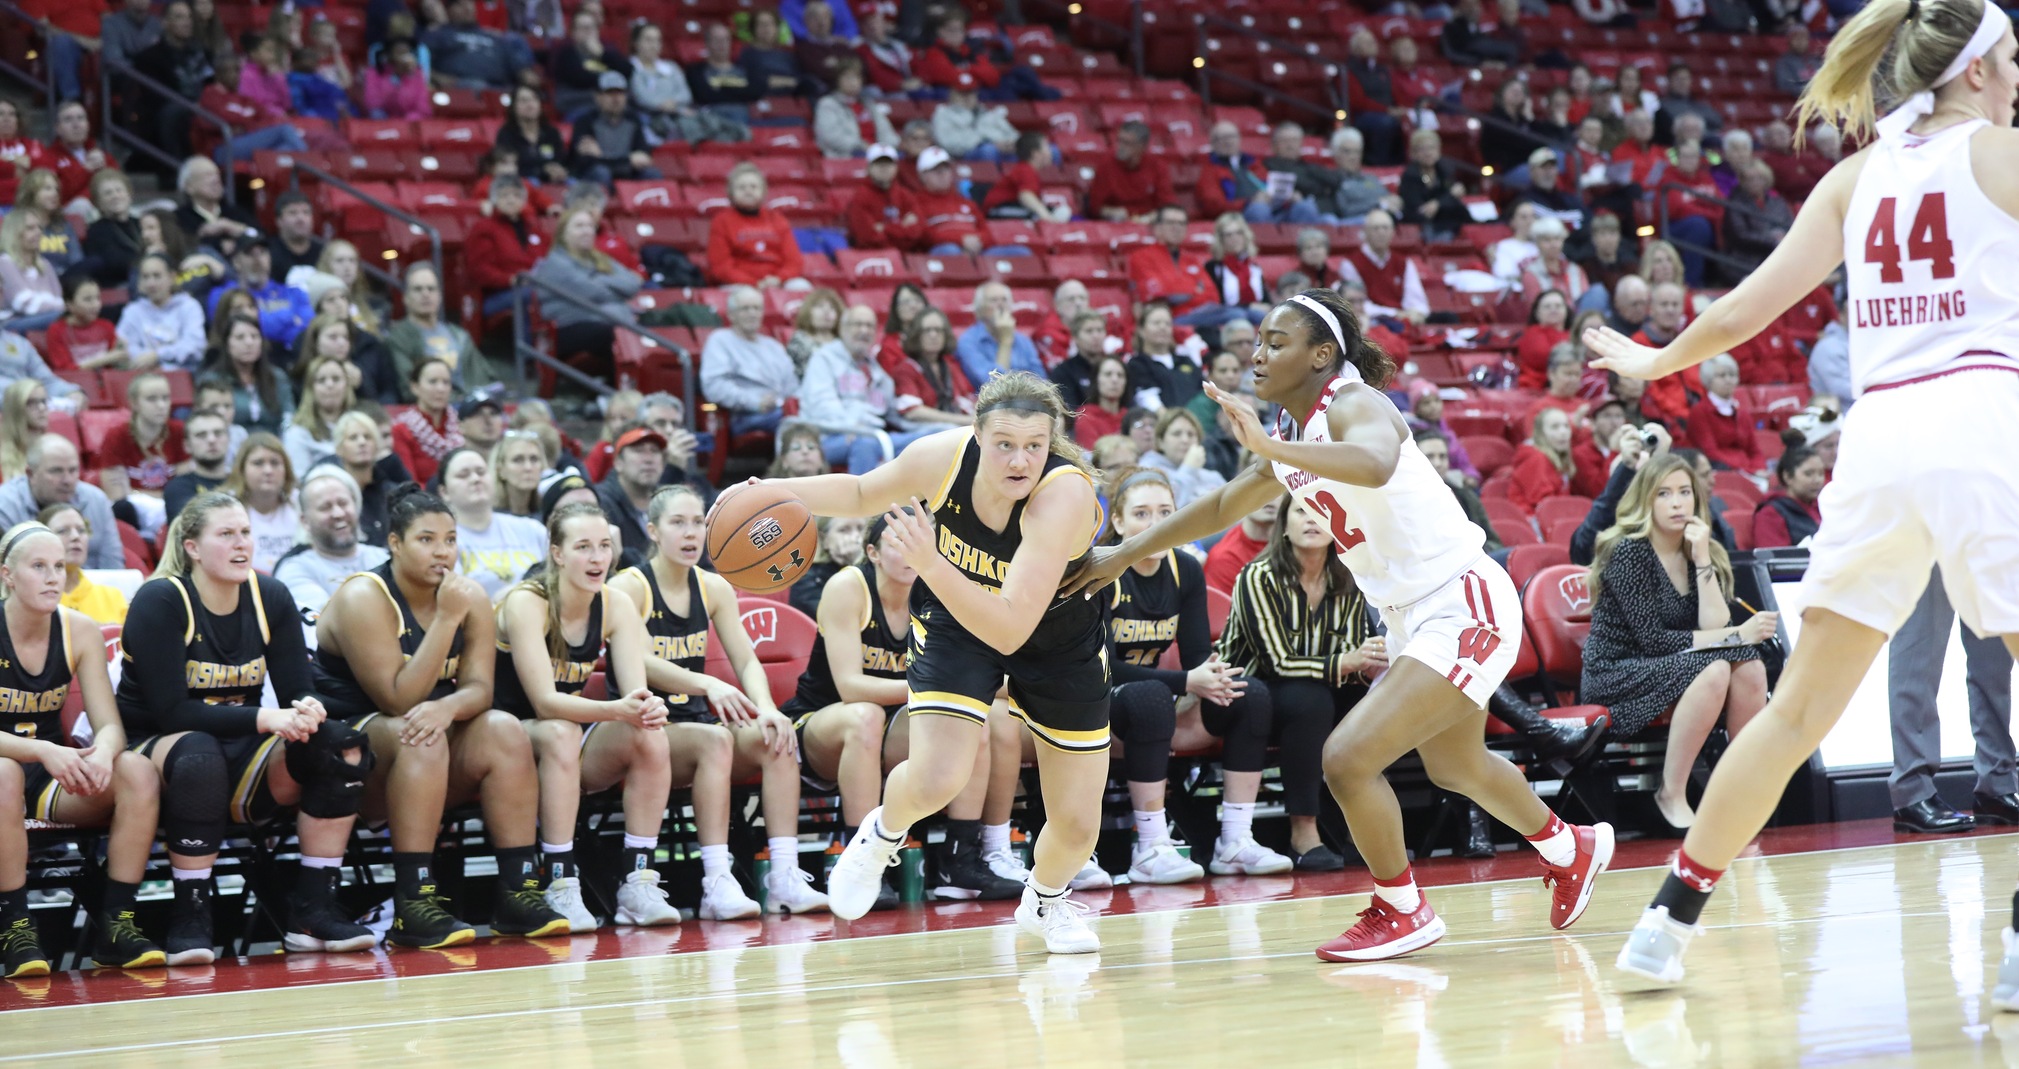 Leah Porath scored seven points, collected nine rebounds and recorded two steals against the Division I Badgers.